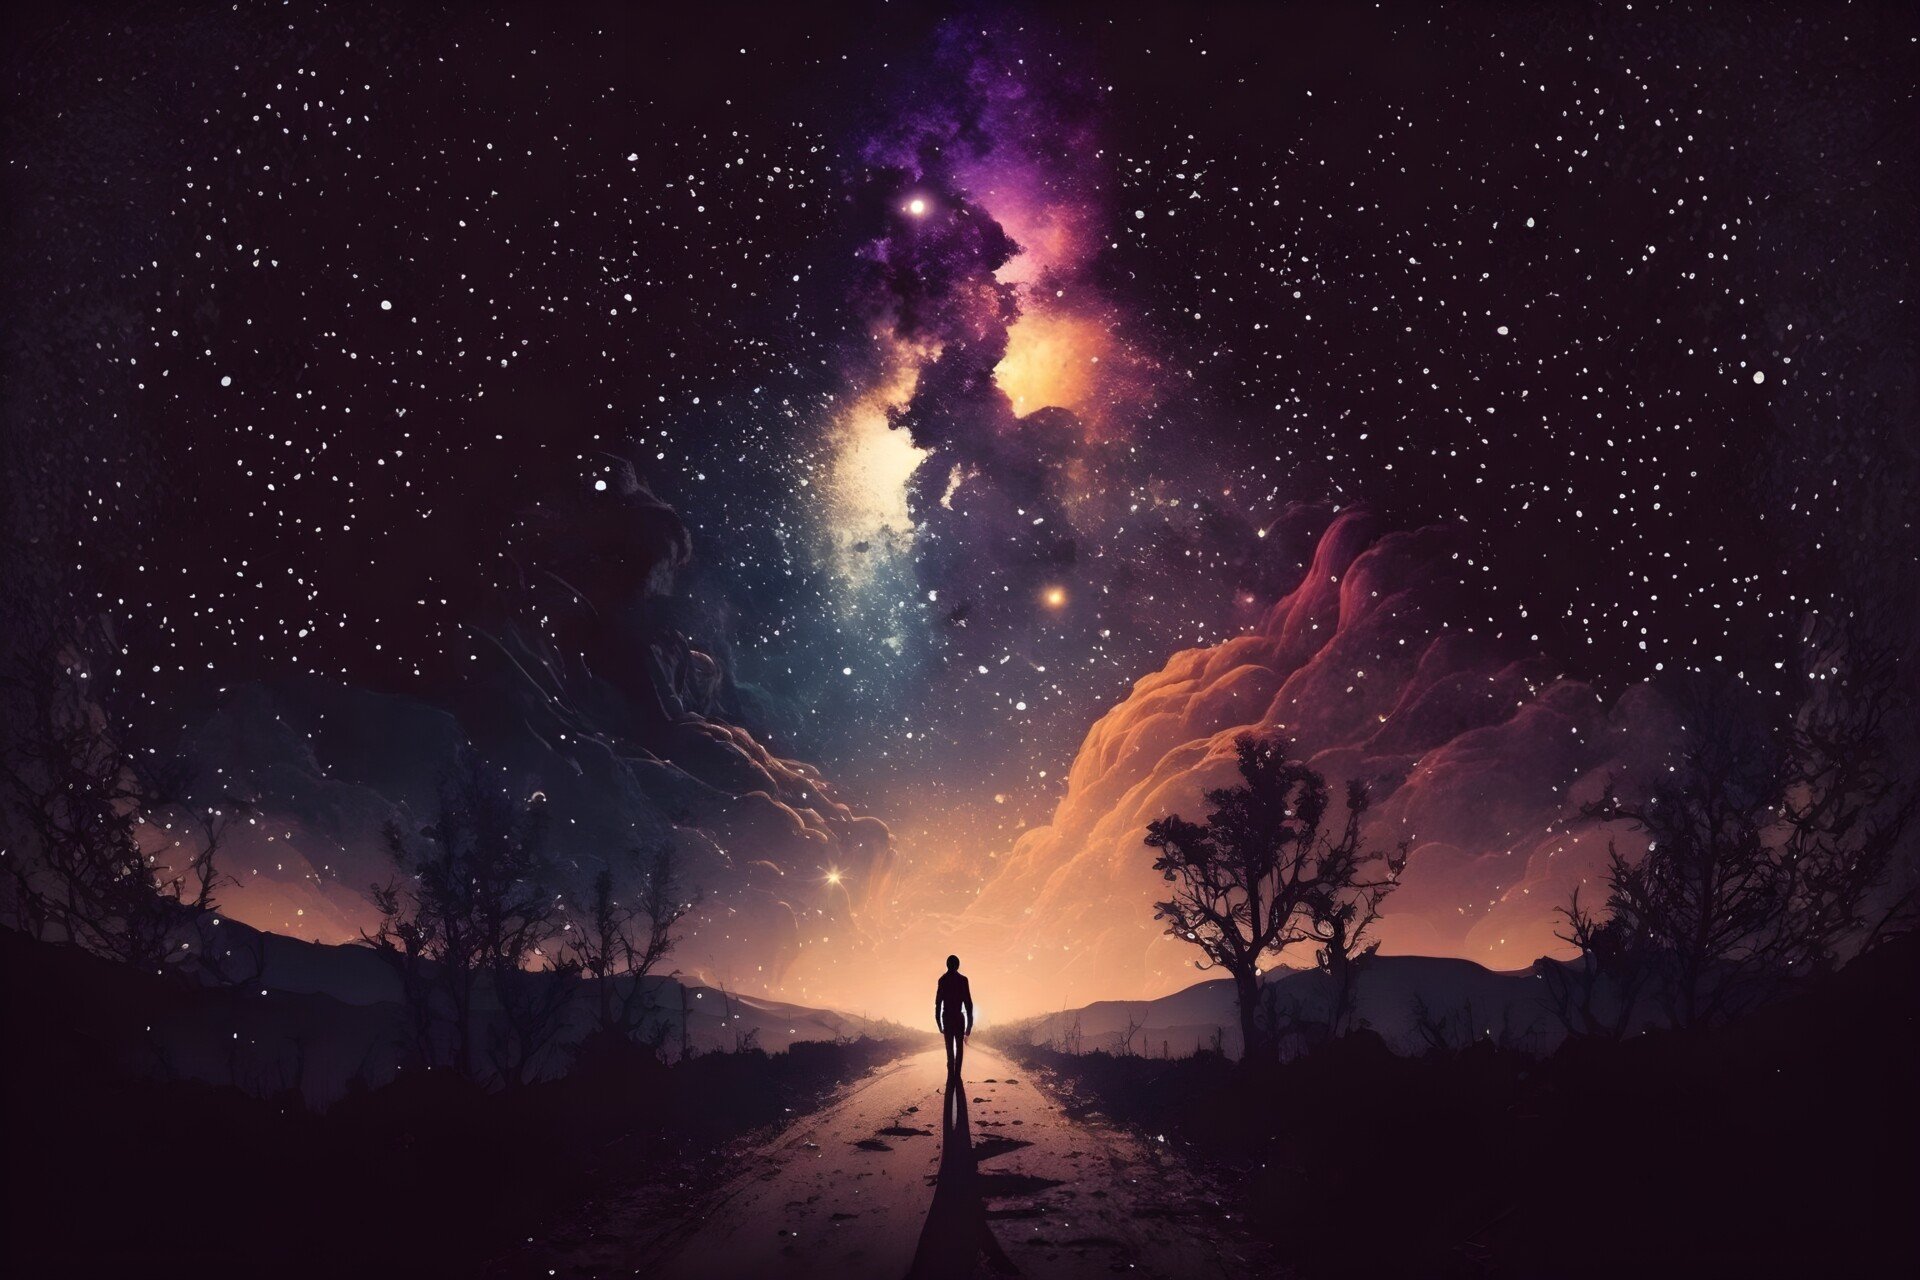 a colorful night sky with stars, clouds, and a person walking along a path